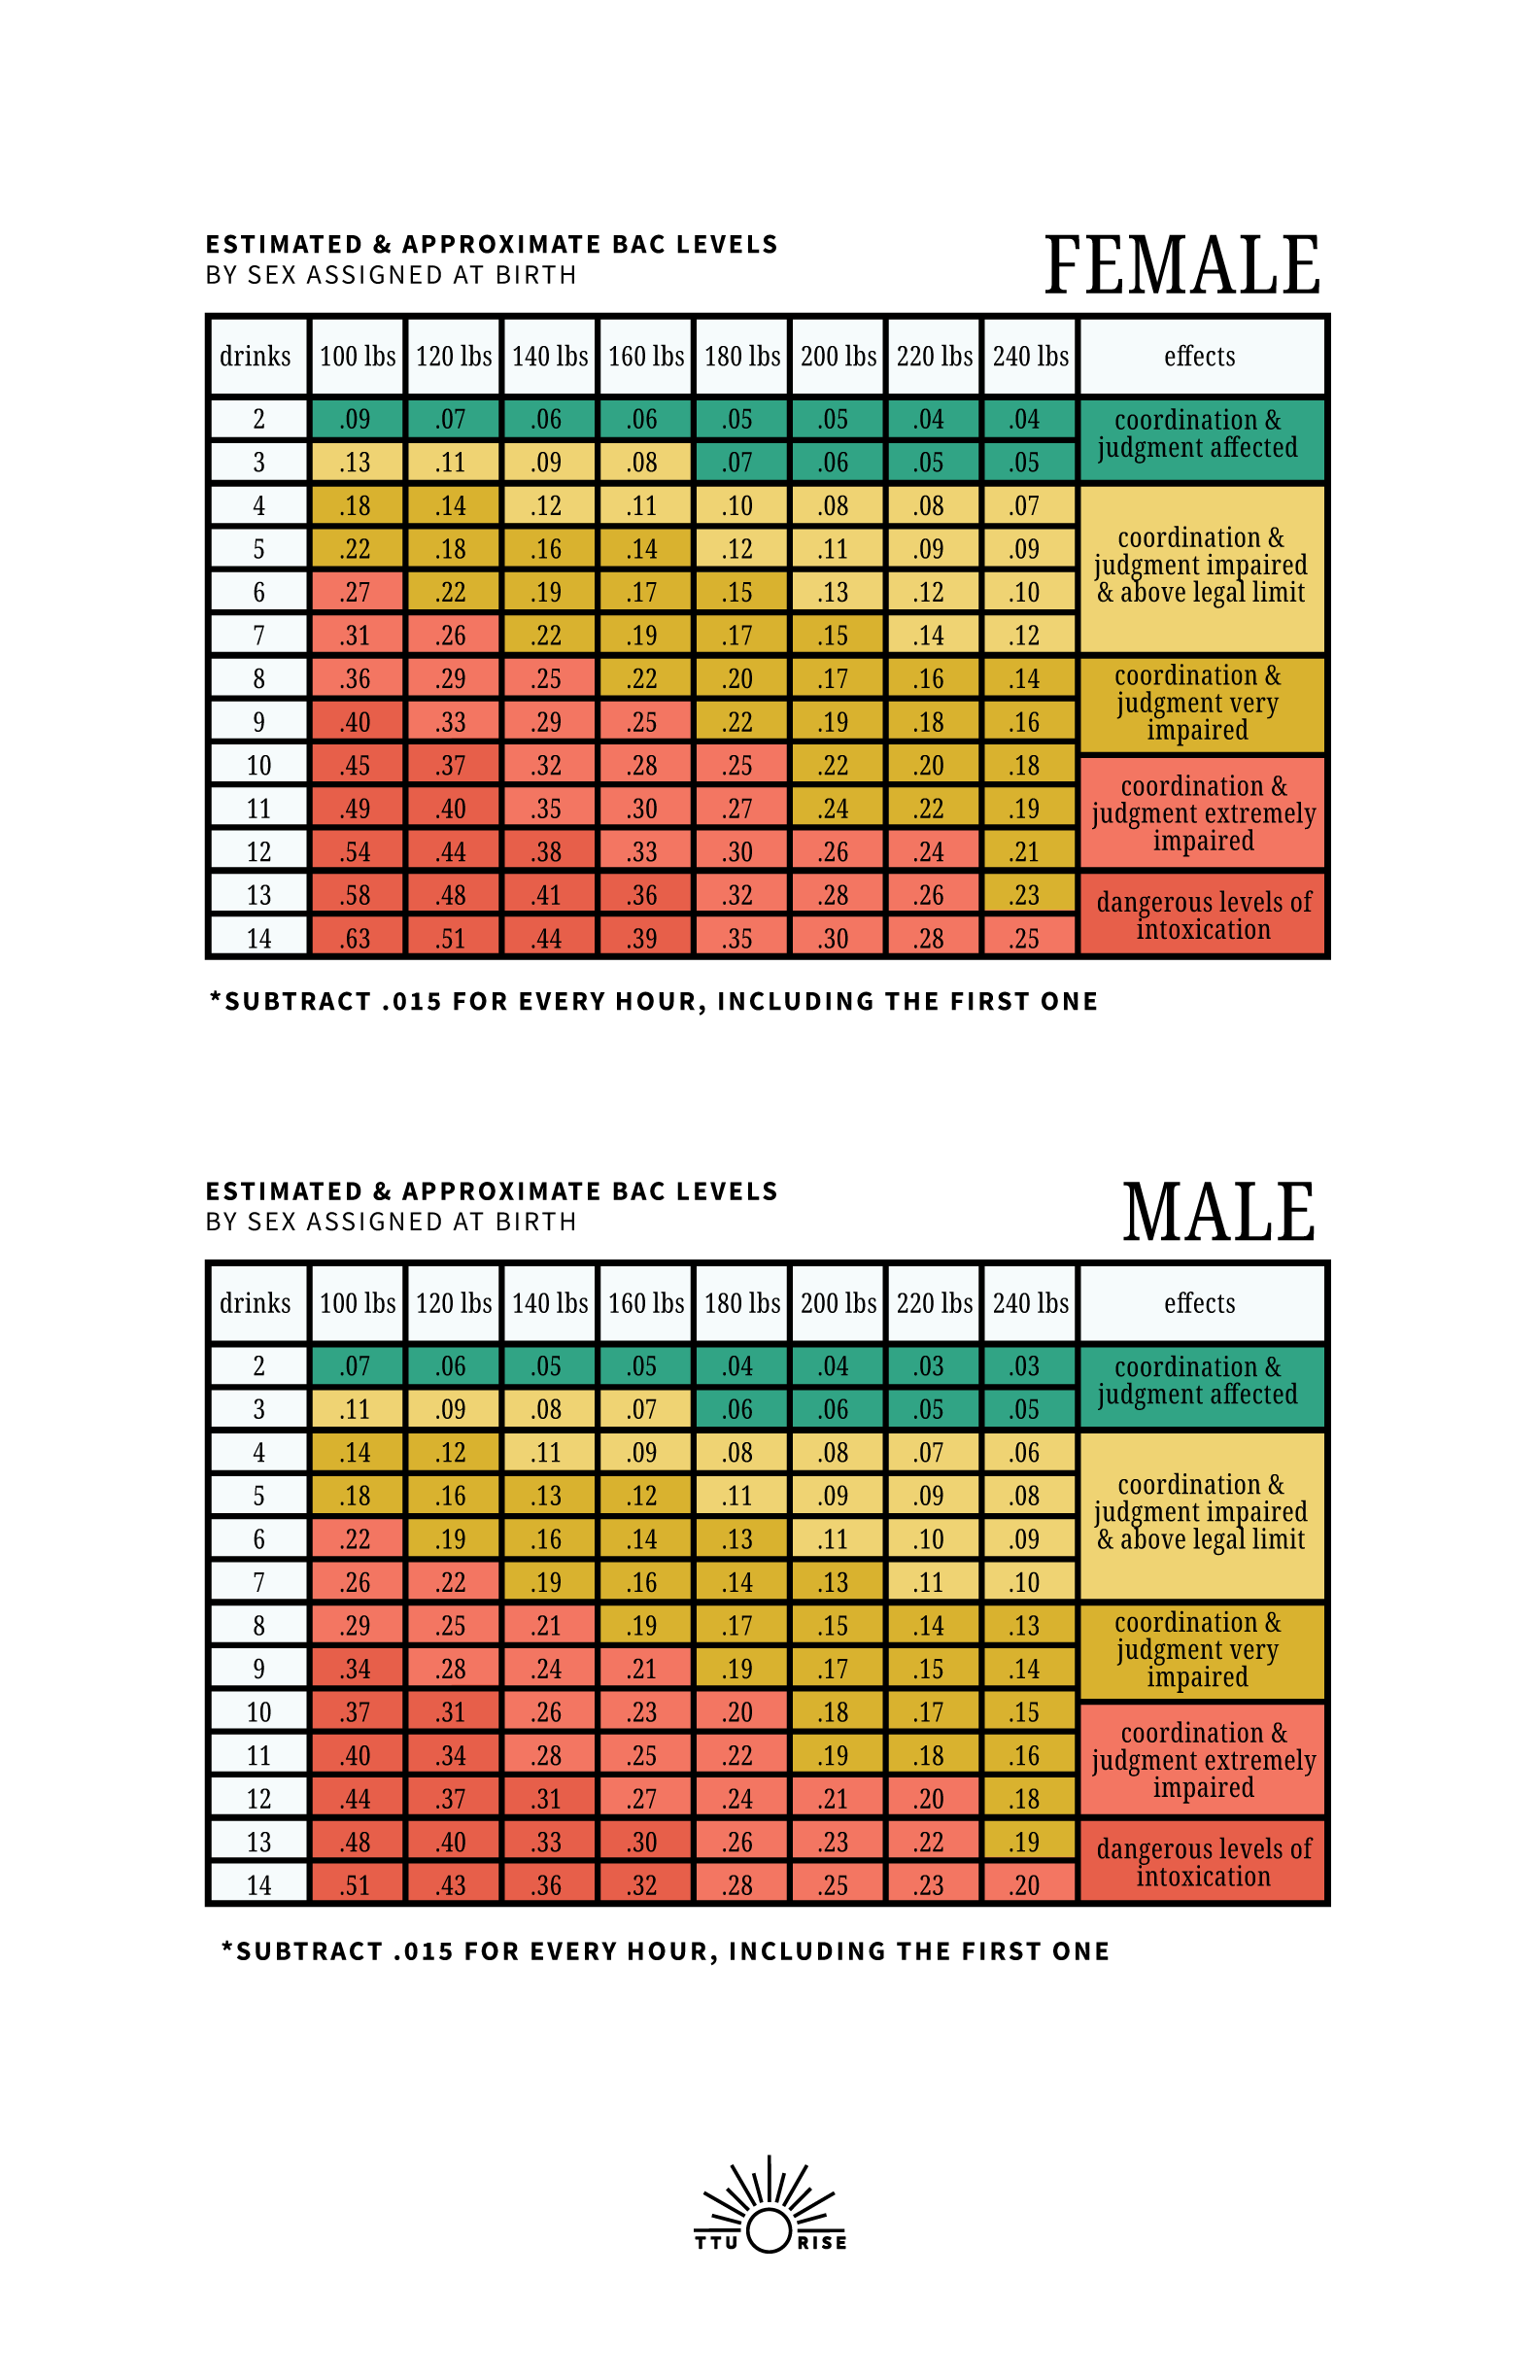 Blood Alcohol Content (BAC) Female and Male Charts